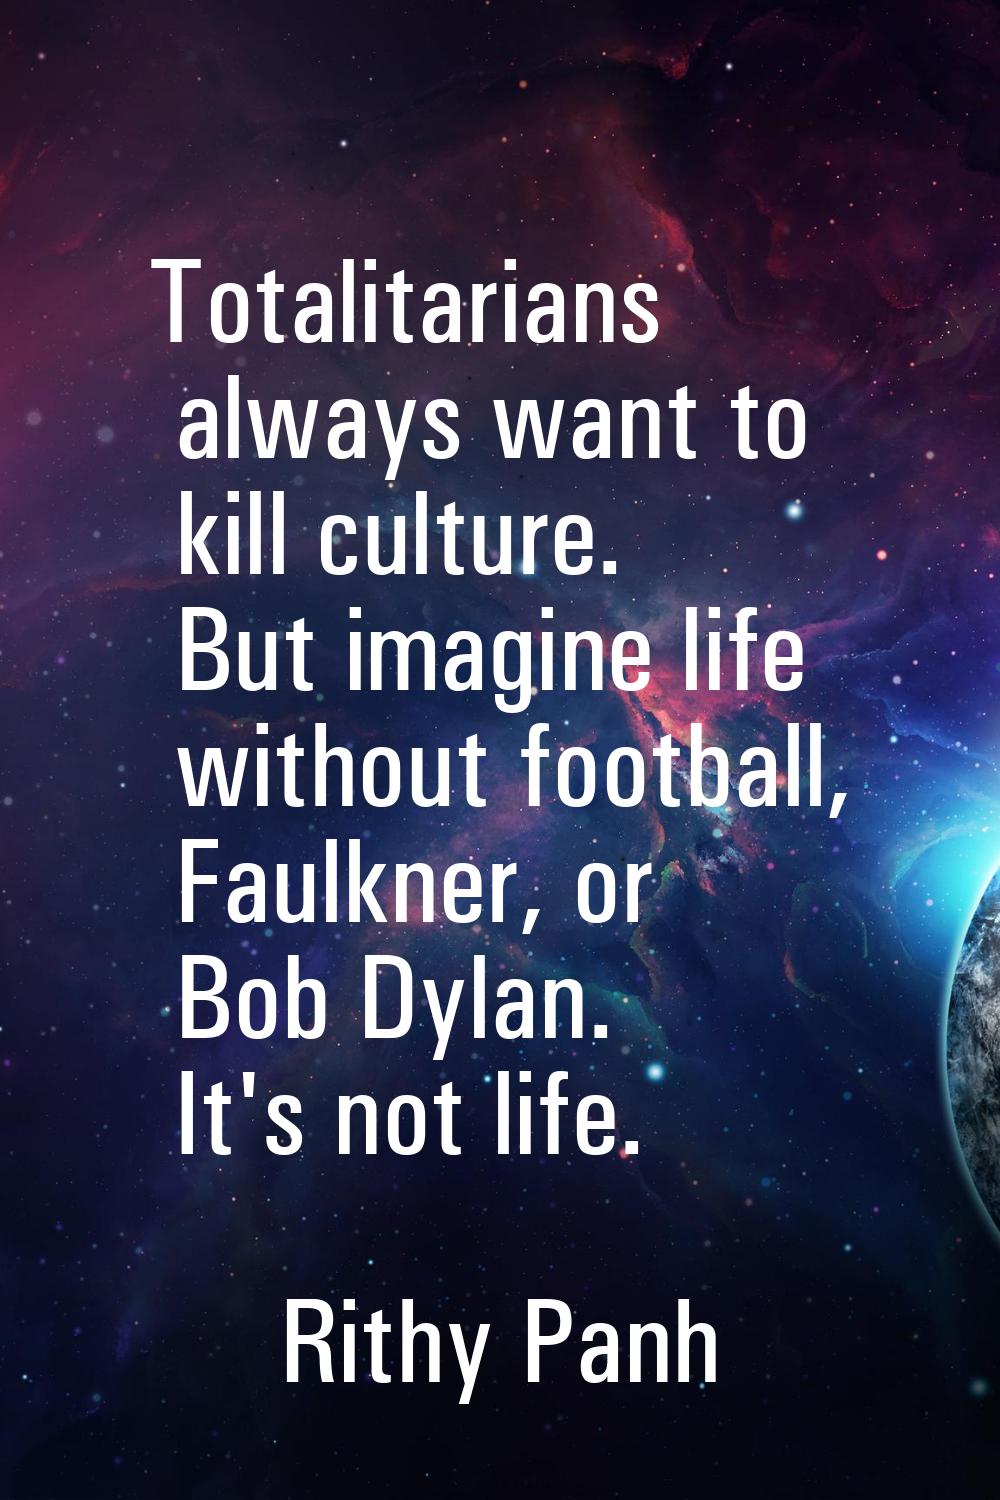 Totalitarians always want to kill culture. But imagine life without football, Faulkner, or Bob Dyla